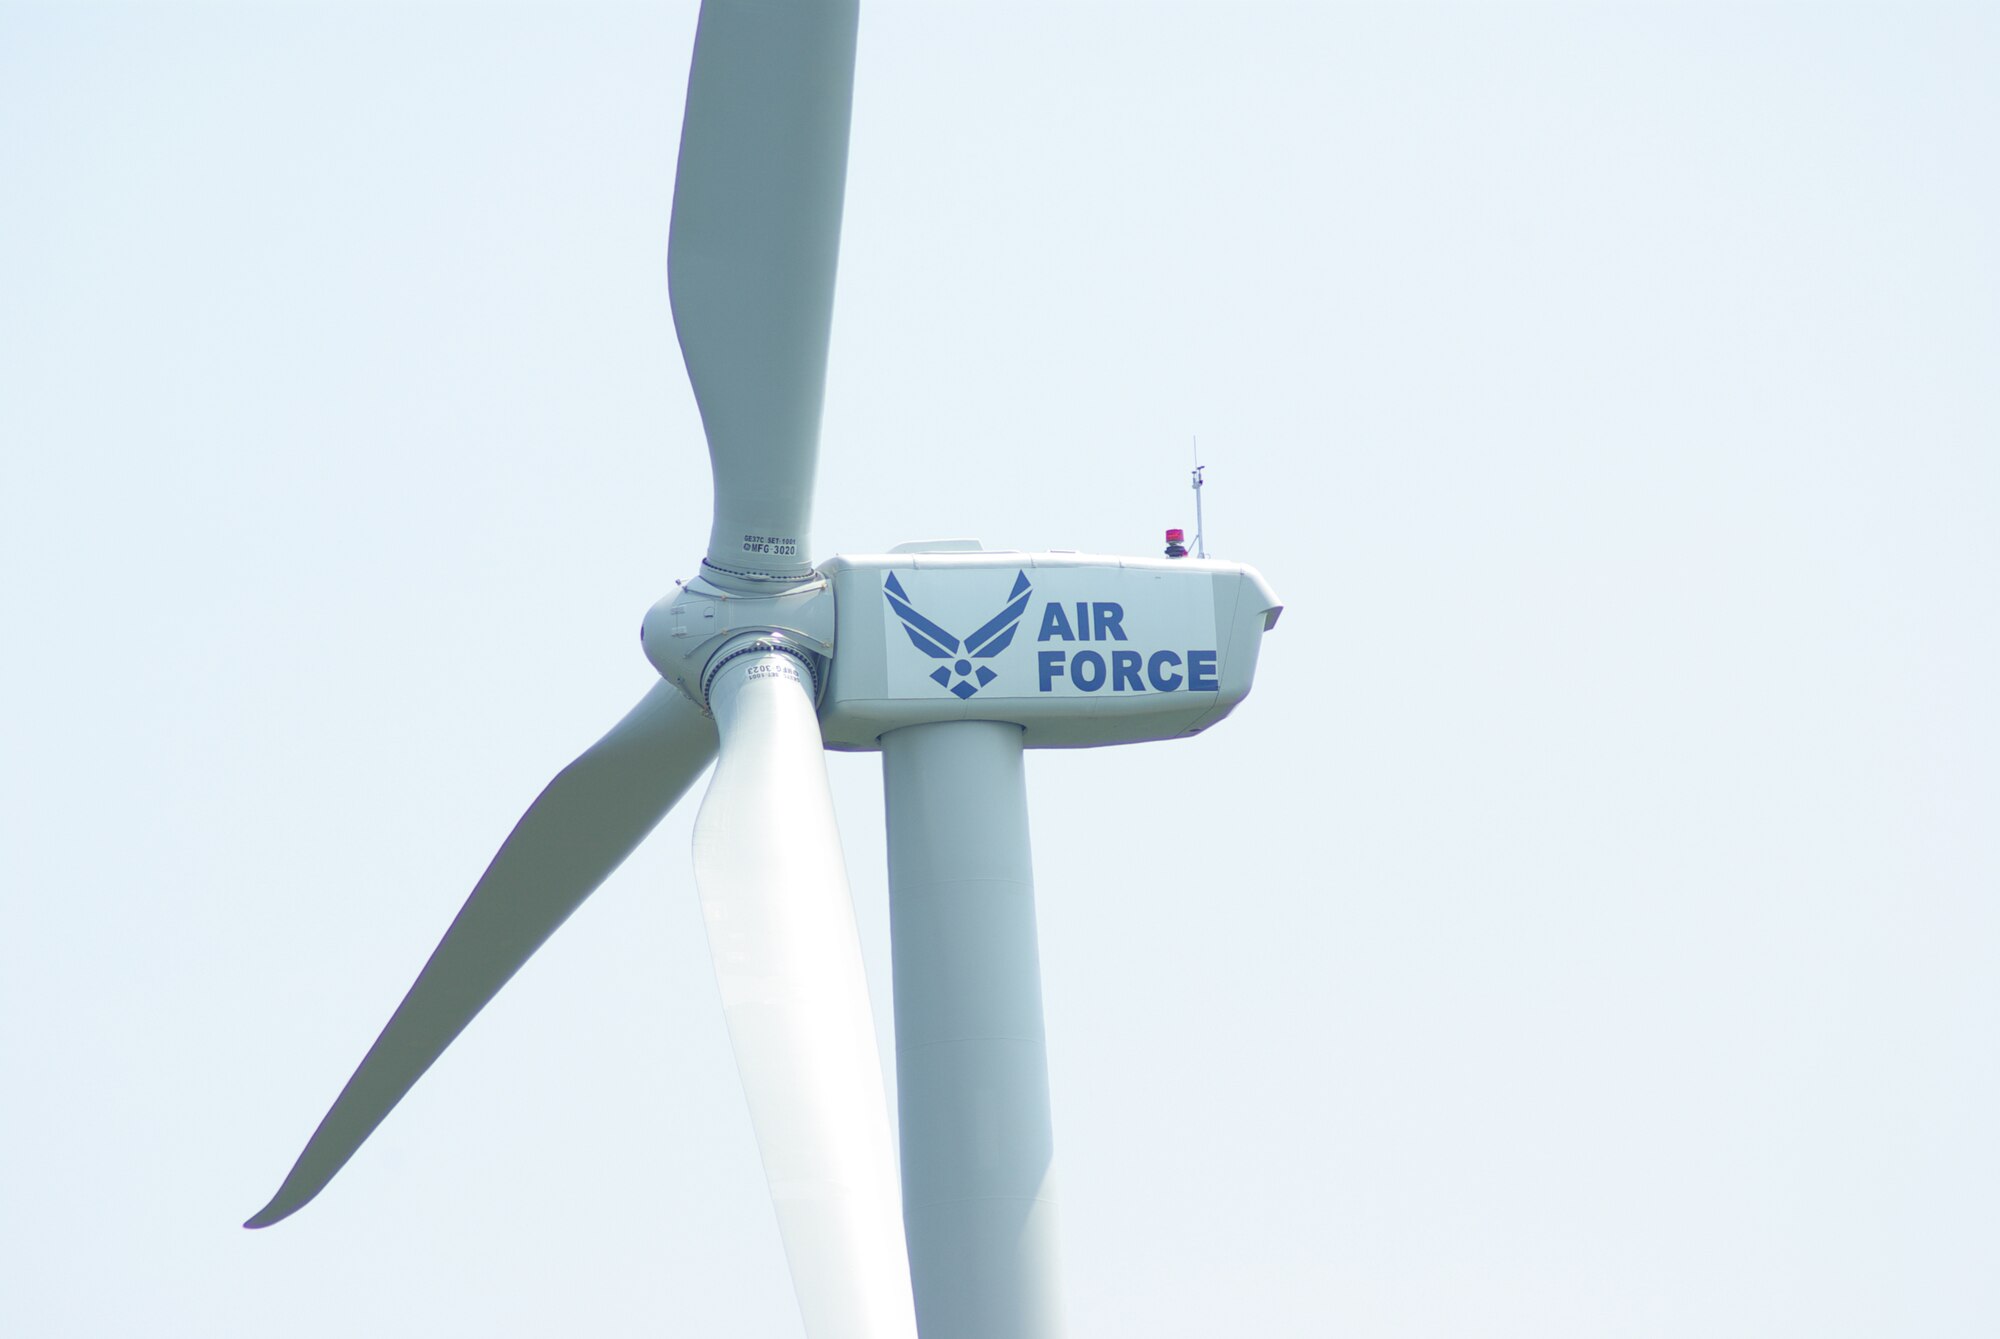 A close-up view of one of the Air Force's two new wind turbines
at the Massachusetts Military Reservation in Cape Cod, Mass. The 1.5
megawatt wind turbines, in addition to an existing turbine, were built to
offset electrical costs for powering numerous groundwater cleanup systems at
the reservation. The turbines will pay for all the Air Force's electric
needs for groundwater remediation at MMR, saving more than $1.5 million per
year. They will also offset emissions generated by fossil-fueled power
plants, reducing the Air Force's carbon footprint. (U.S. Air Force
photo/Scott Dehainaut)